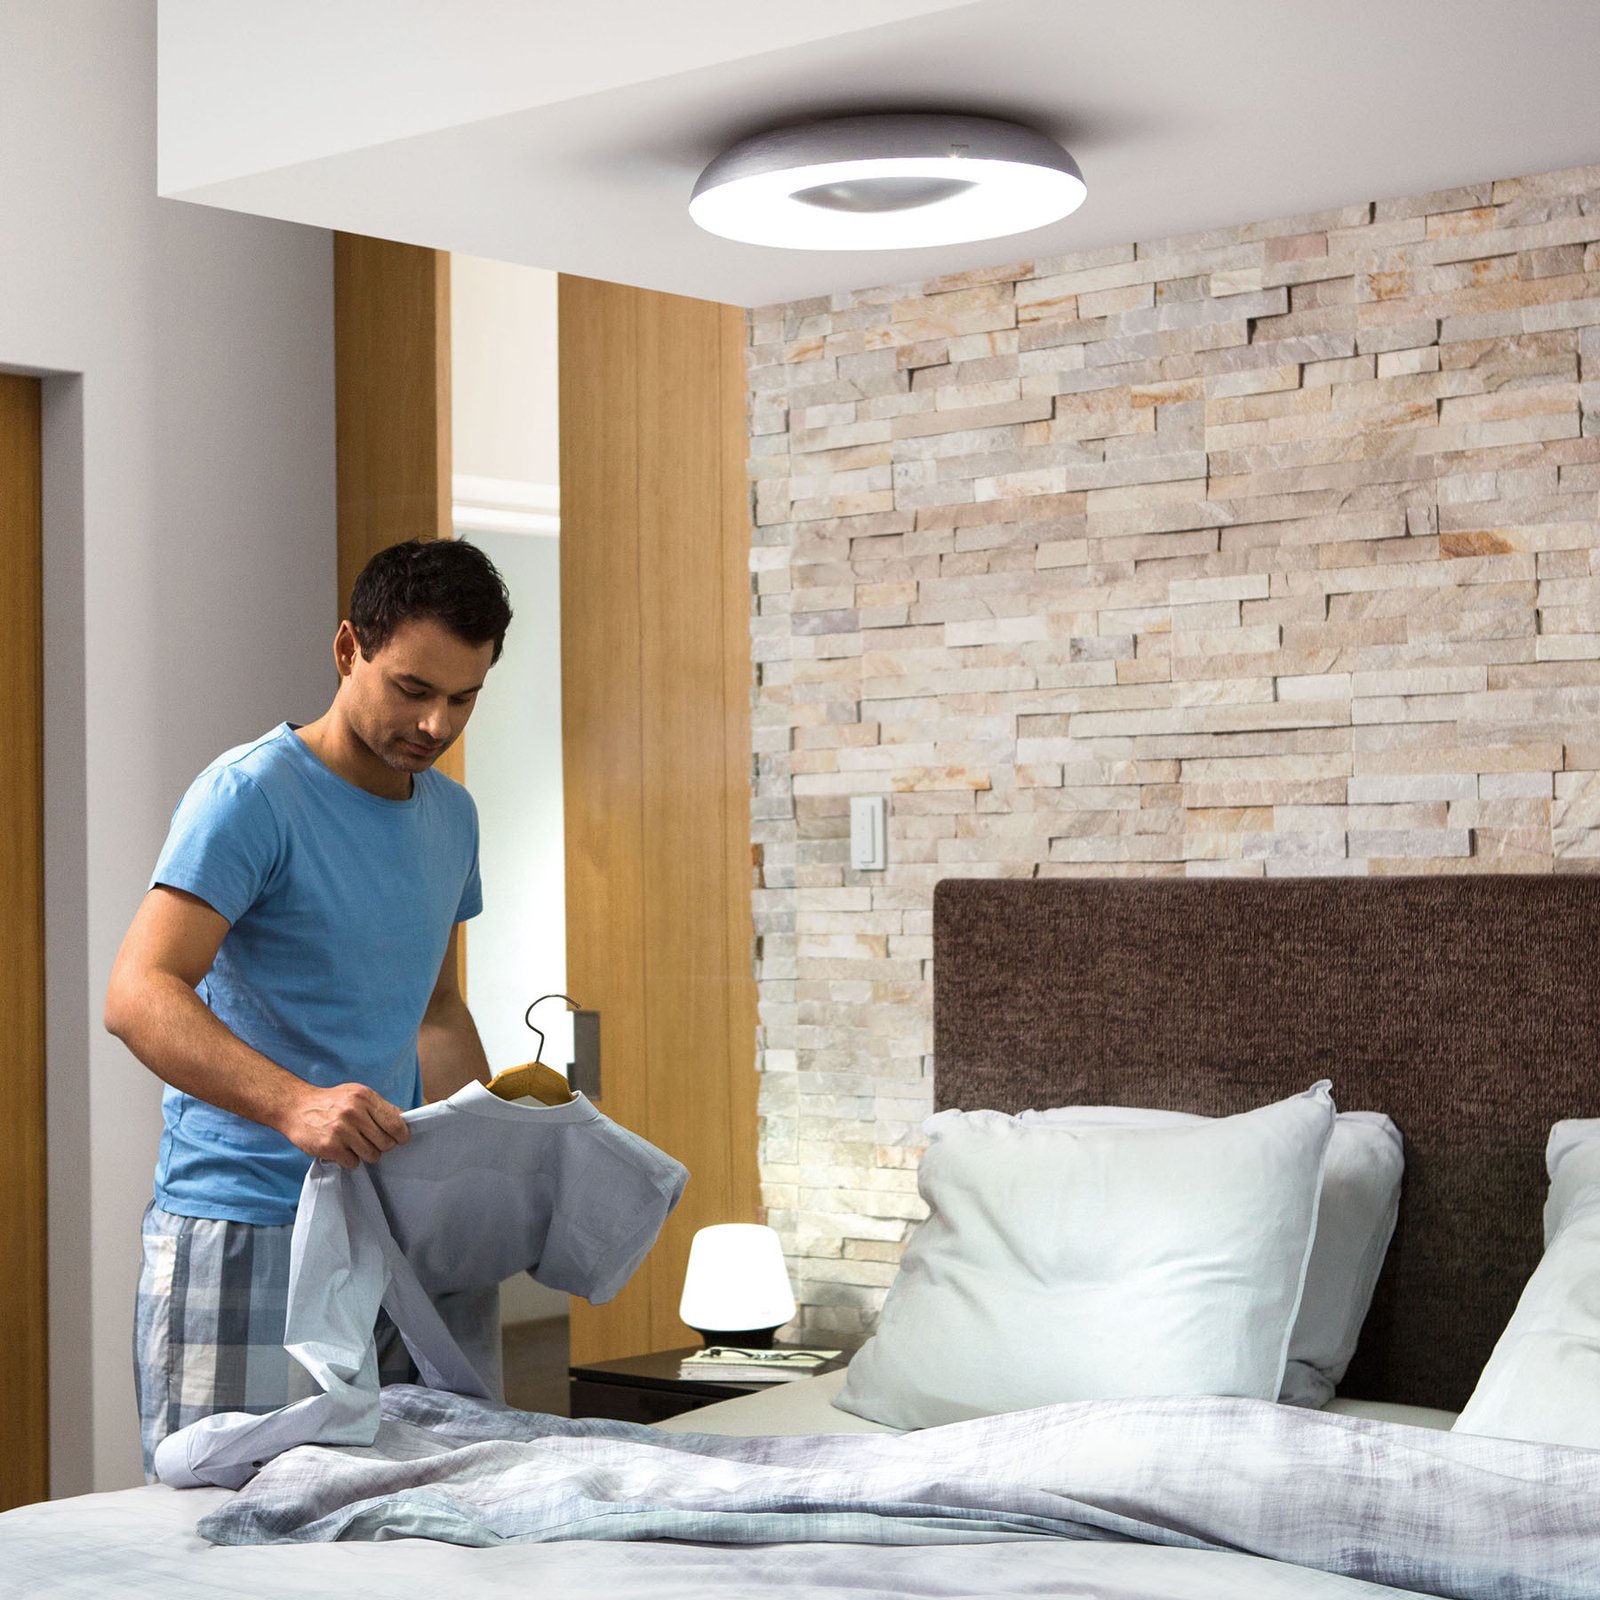 Philips Hue White Ambiance Still ceiling lamp alu